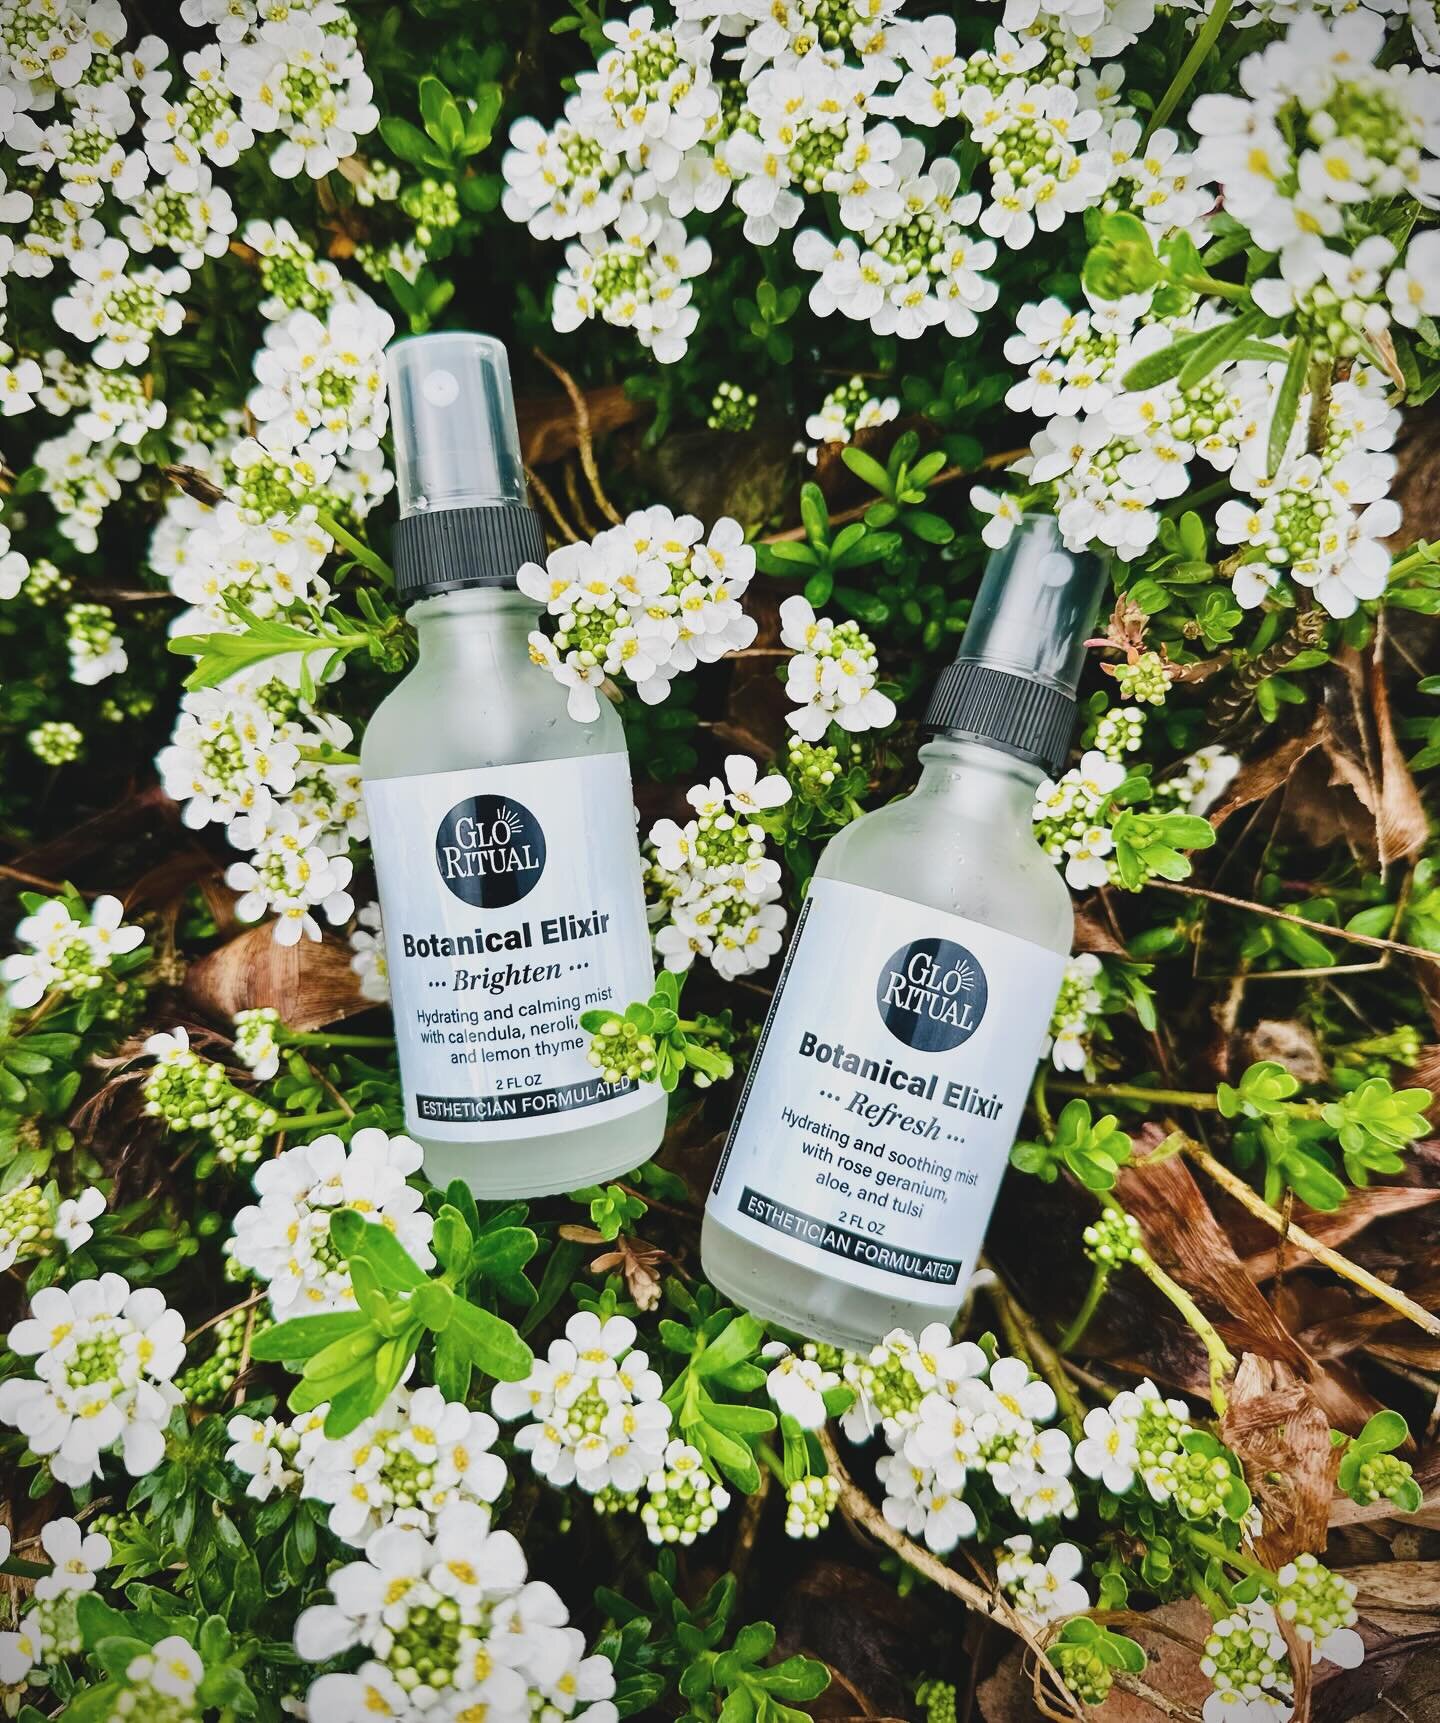 These Botanical Elixirs are perfect for Spring when our skin is adjusting to the changing seasons.

A beautiful blend of plant waters to nourish and awaken the skin and senses + hydration boosting ingredients to help it retain moisture.

These can be